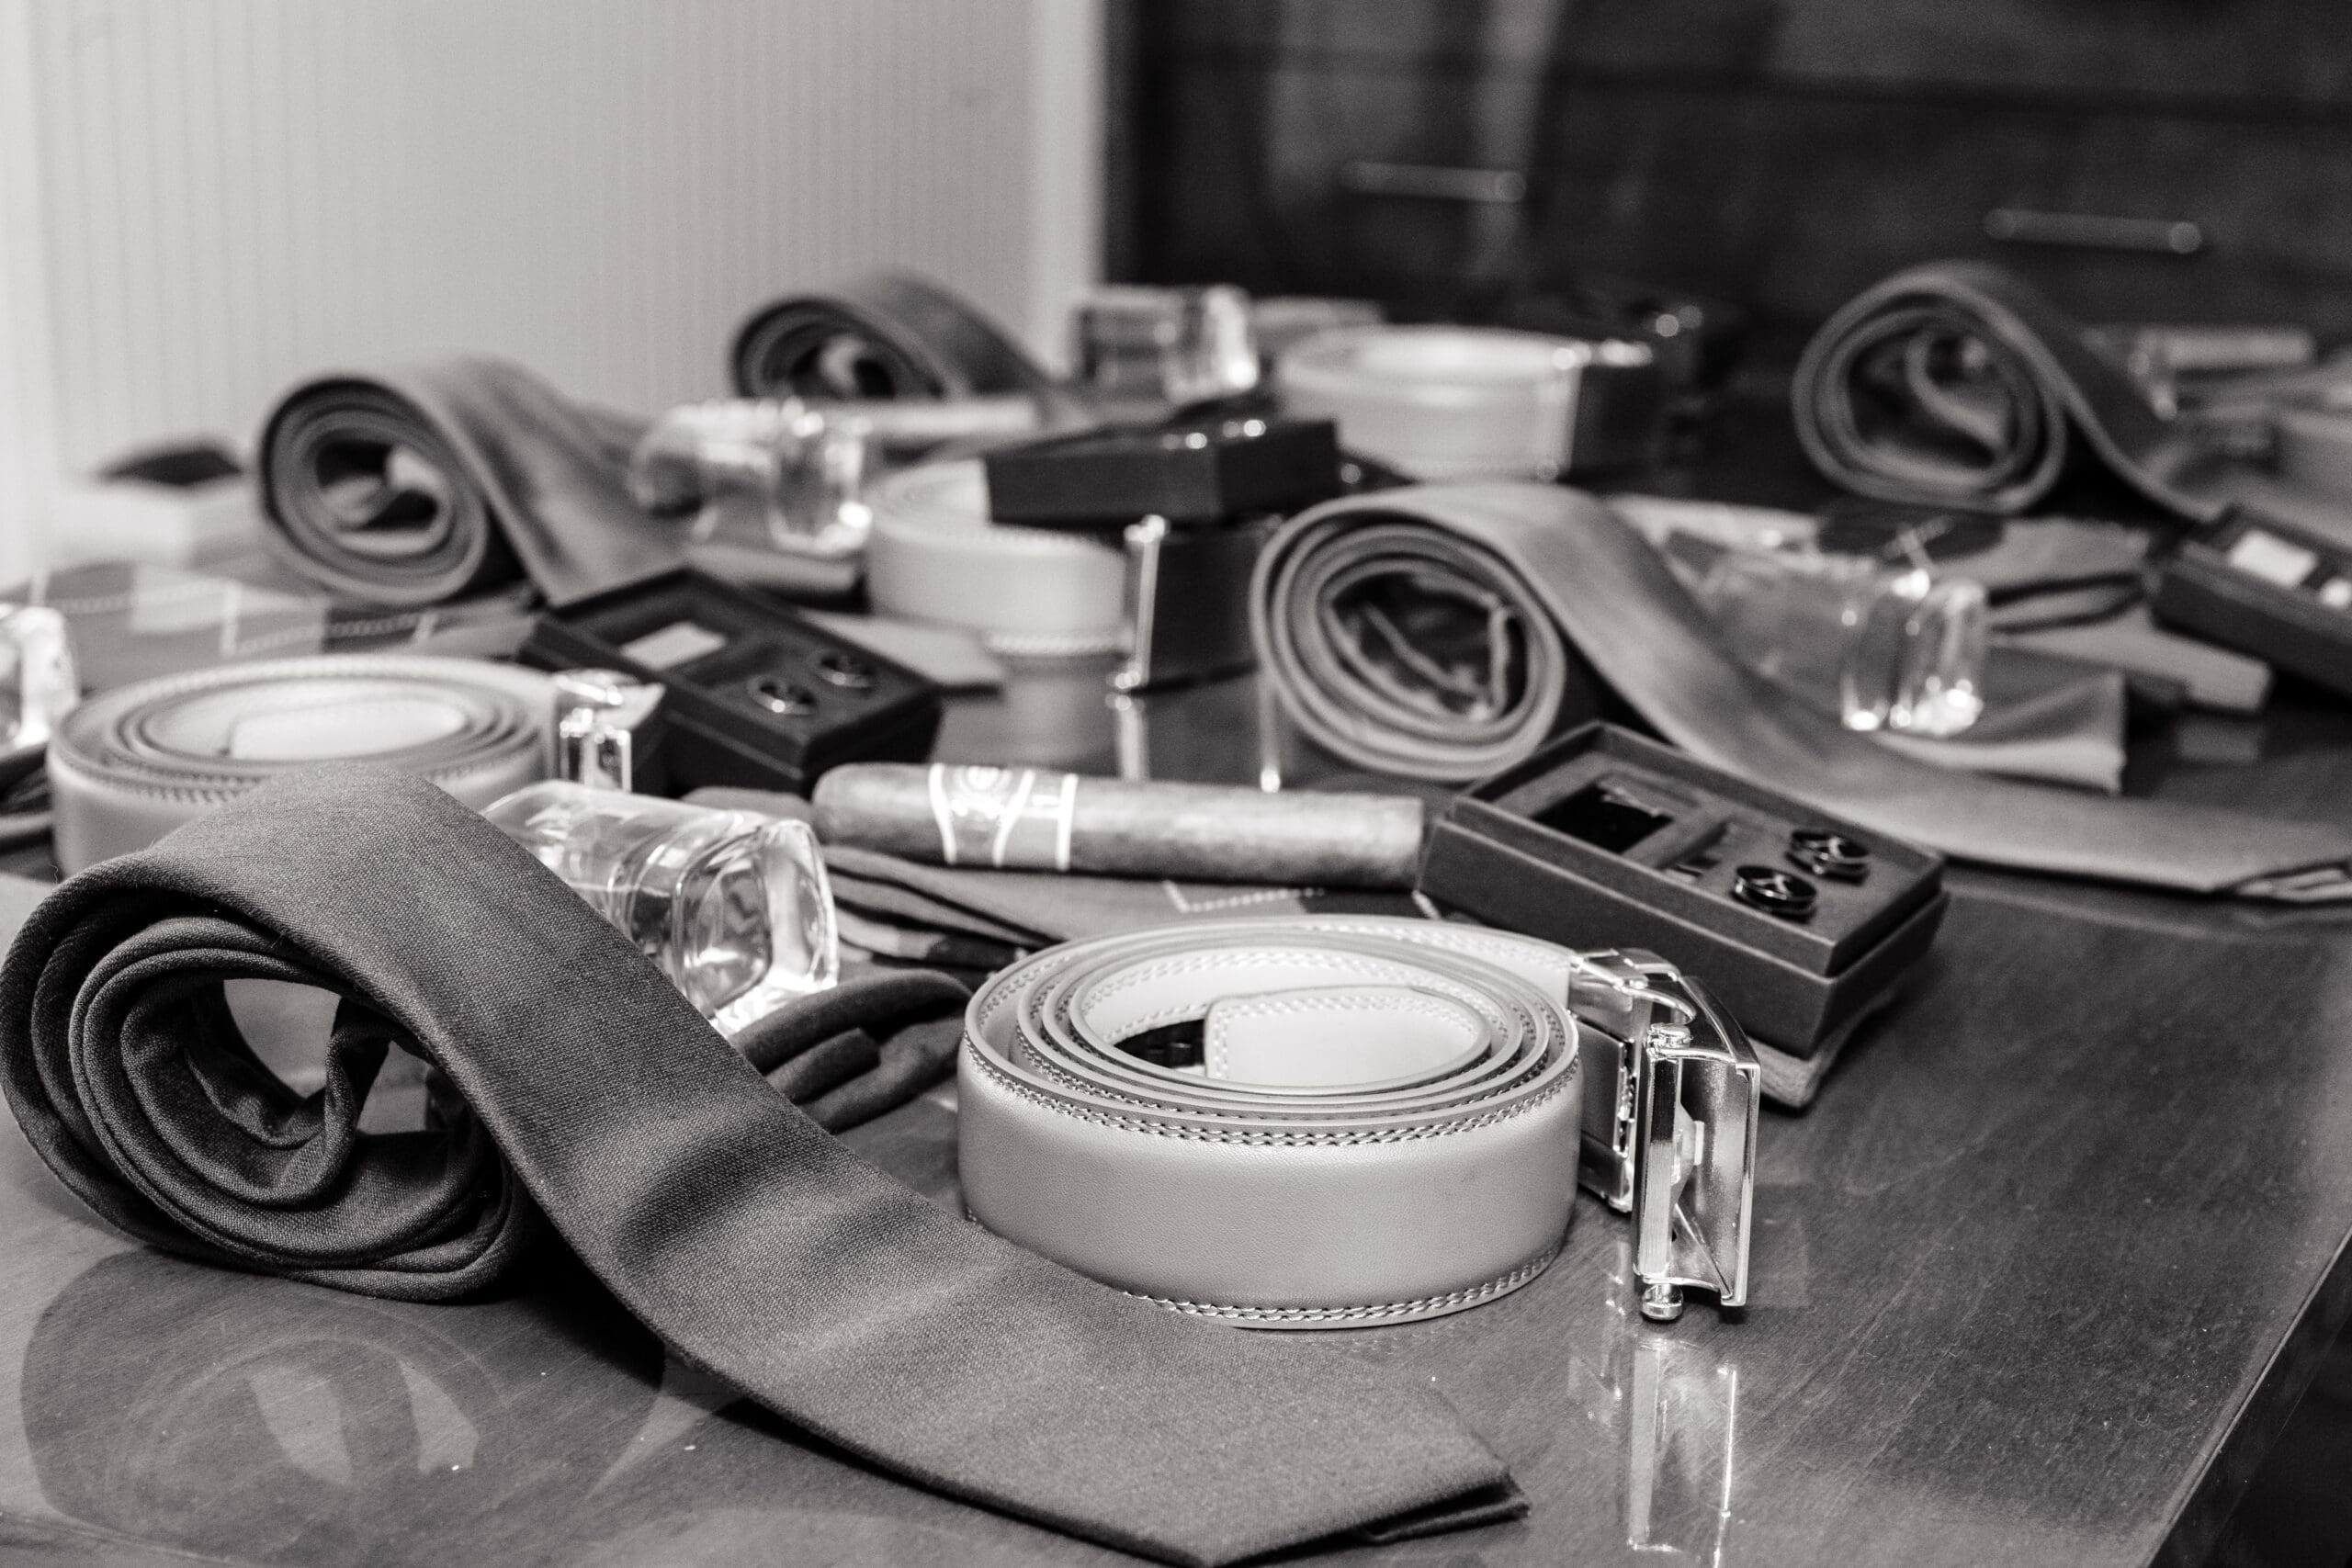 Black and white shot of groomsmen's matching ties, belts, cufflinks, cigars, and shot glasses laid out on a table.